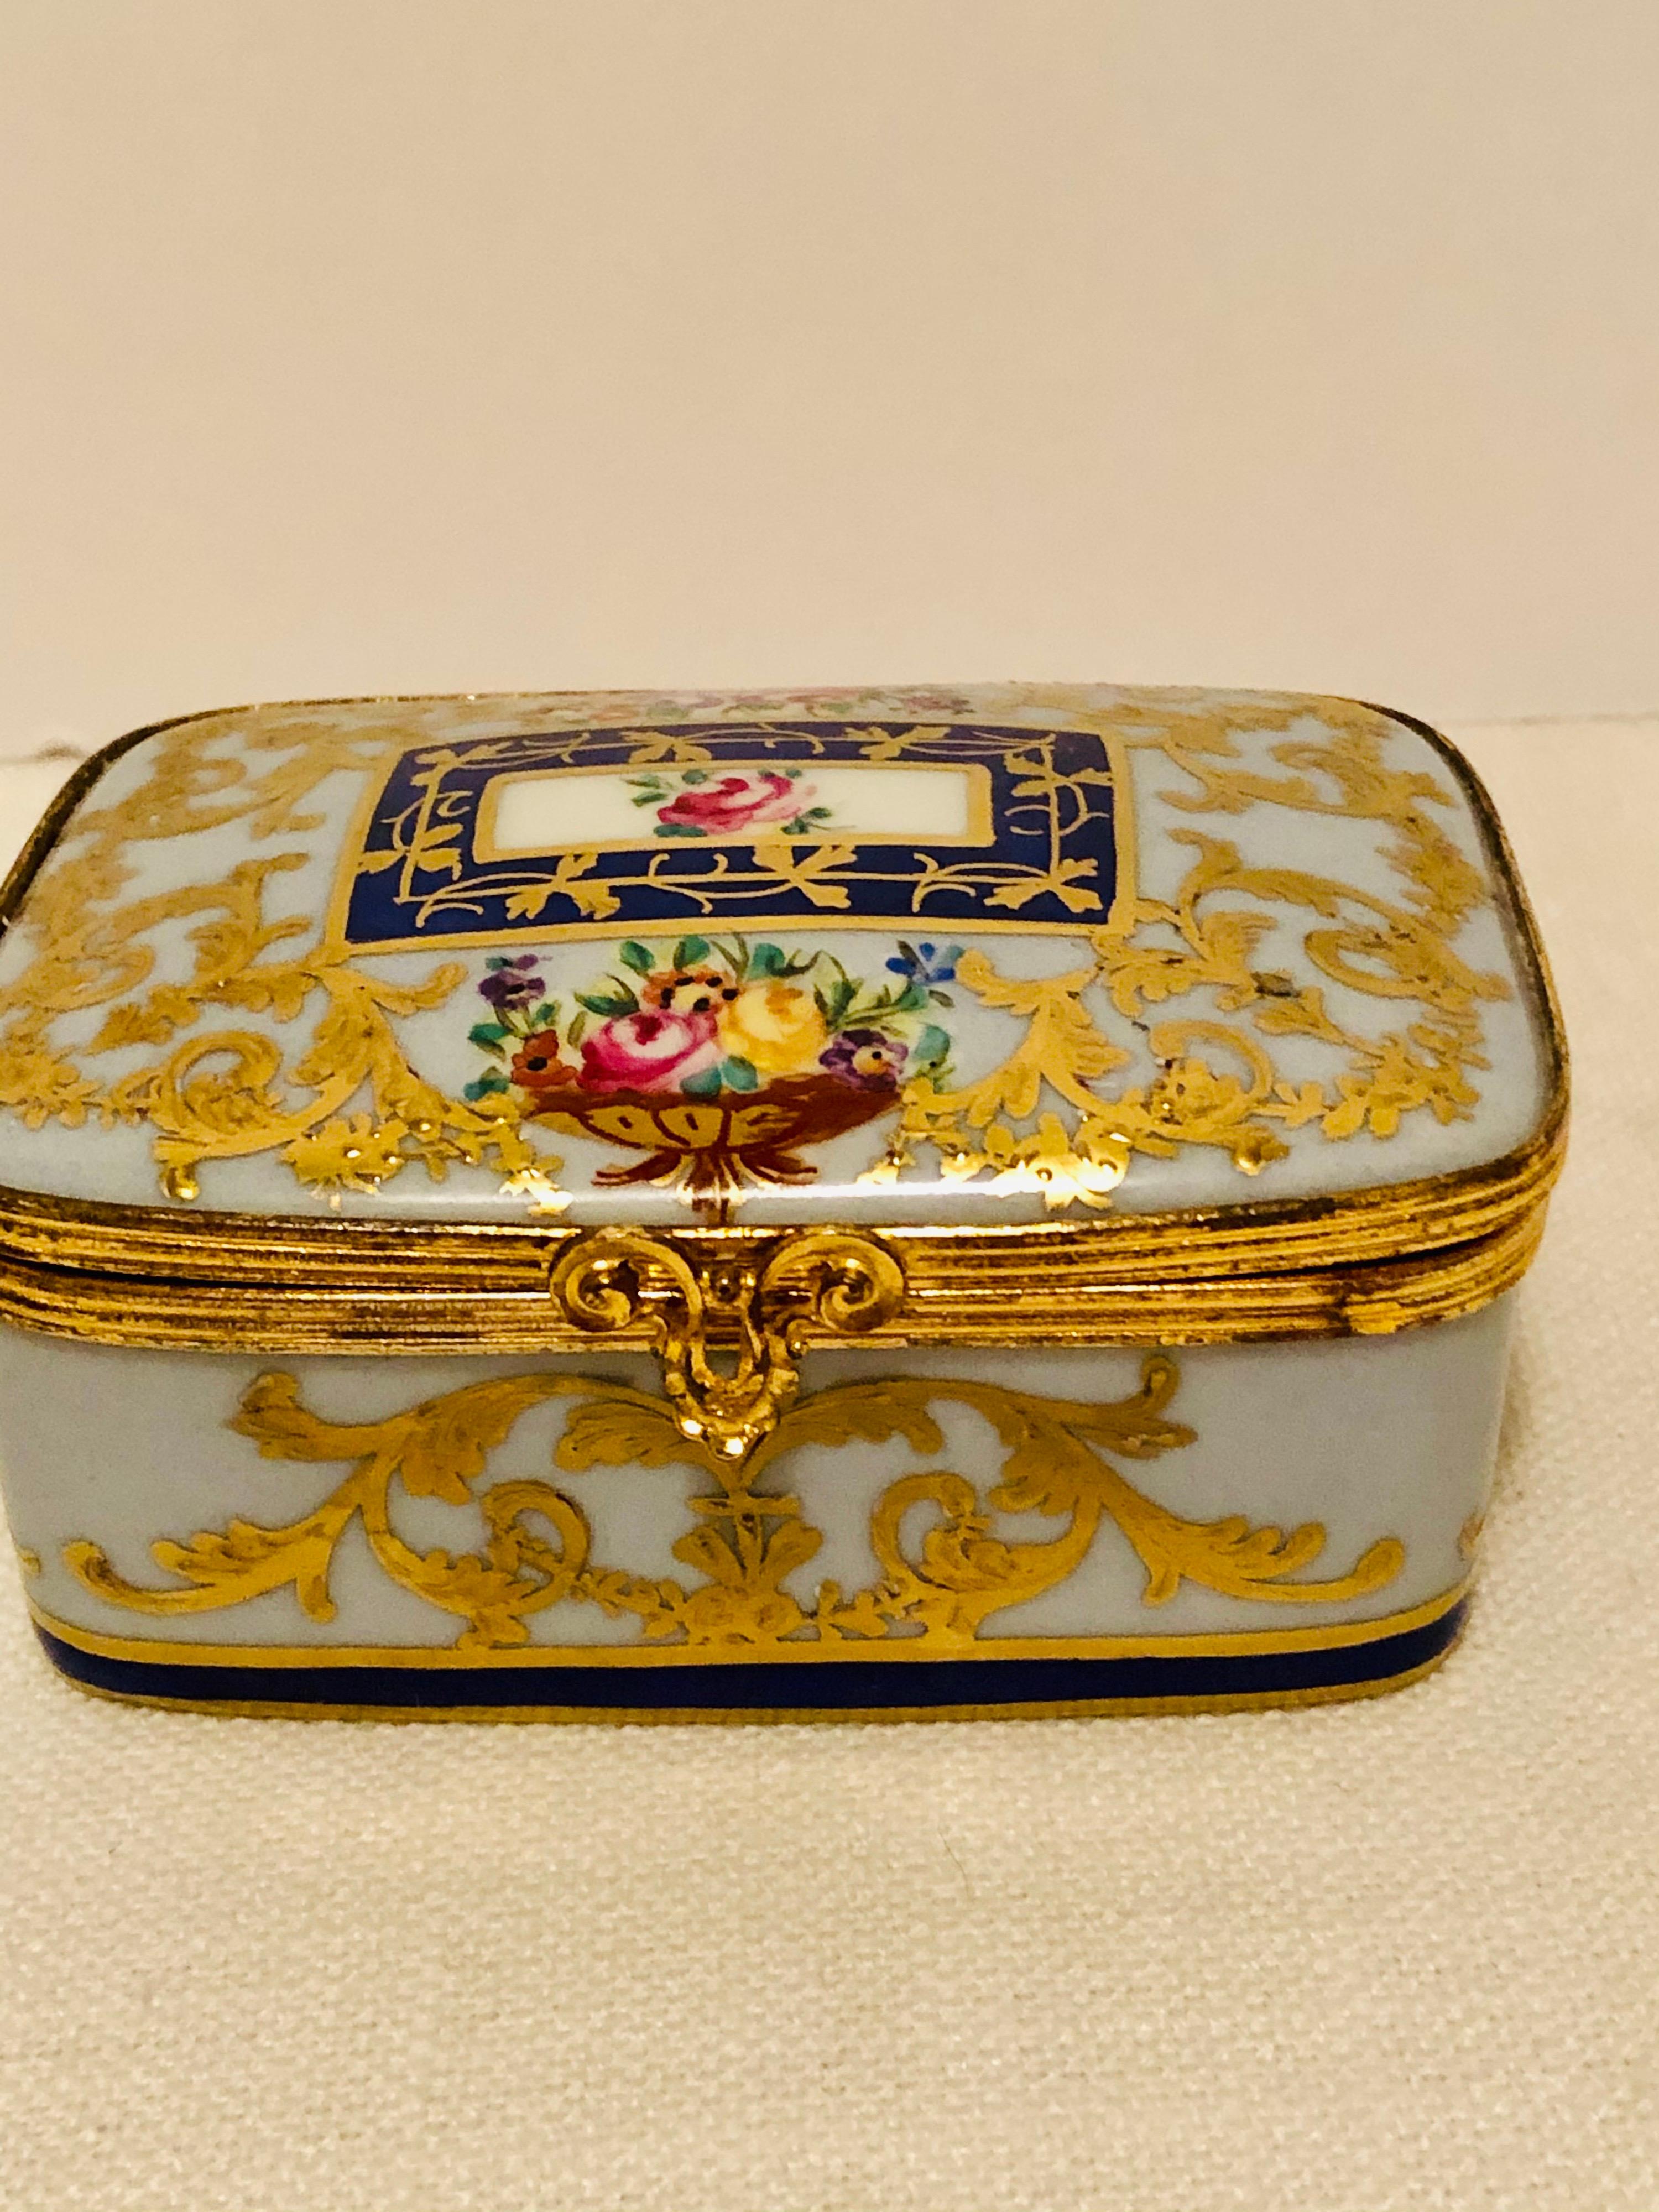 Hand-Painted Le Tallec Porcelain Box with Decorated with Flower Bouquets and Raised Gilding